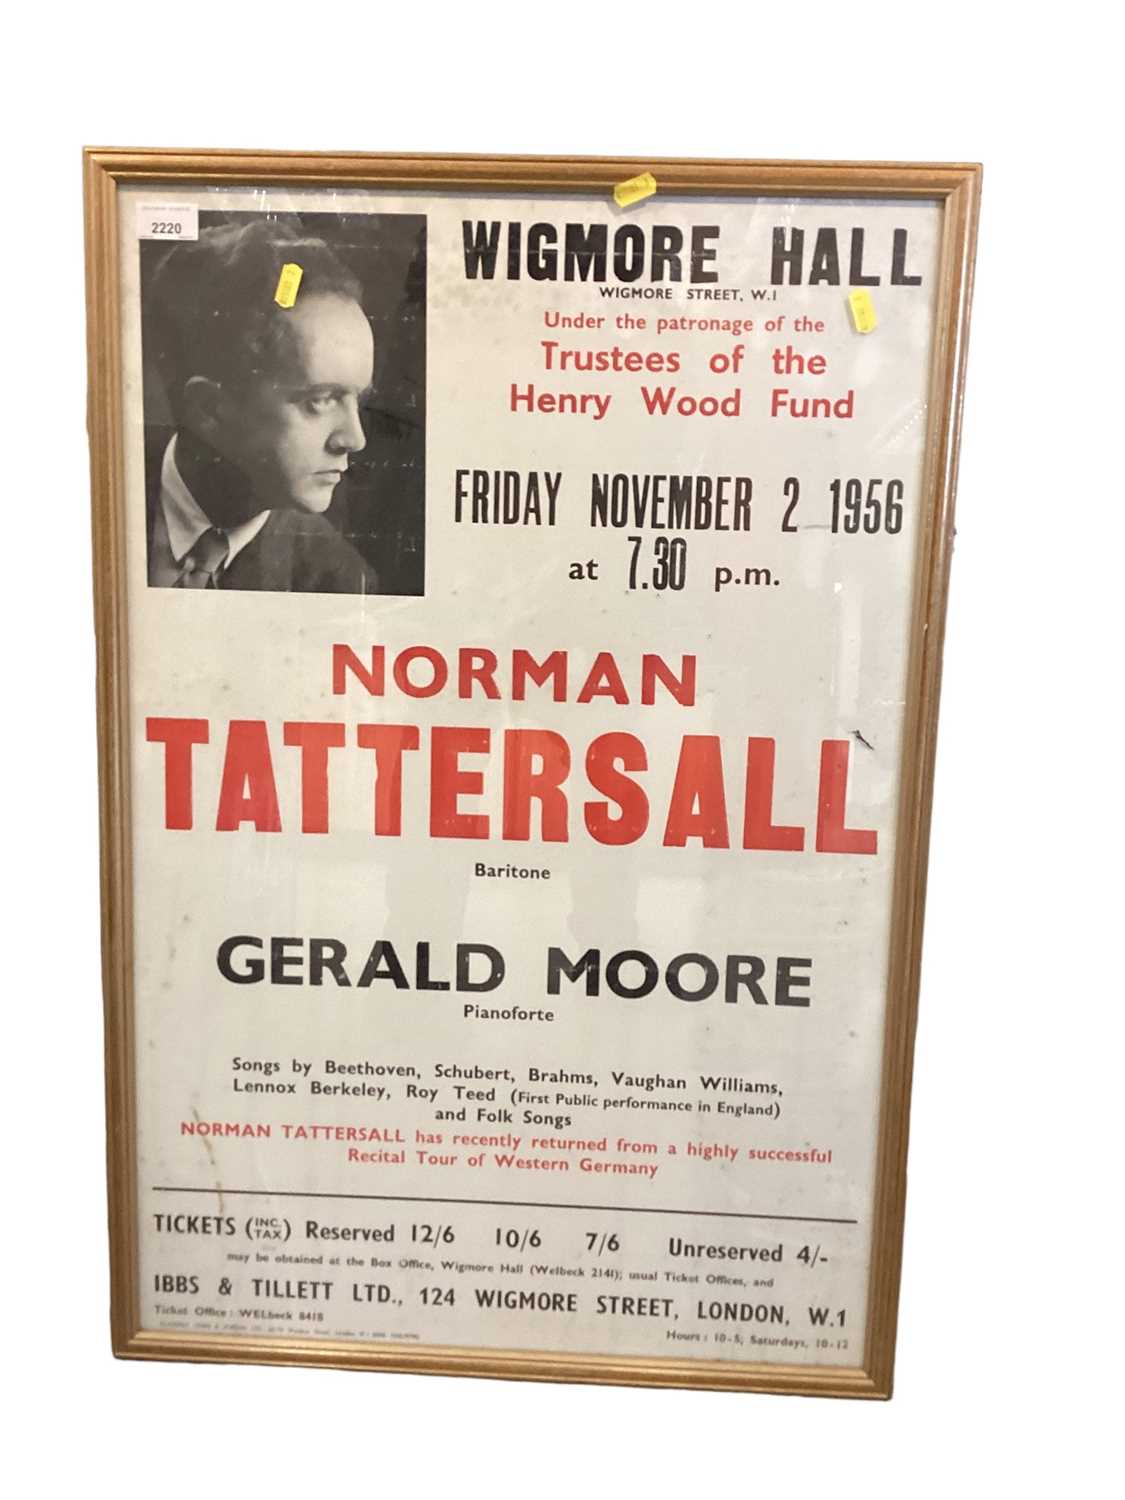 Lot 2220 - 1956 Wigmore Hall poster - framed